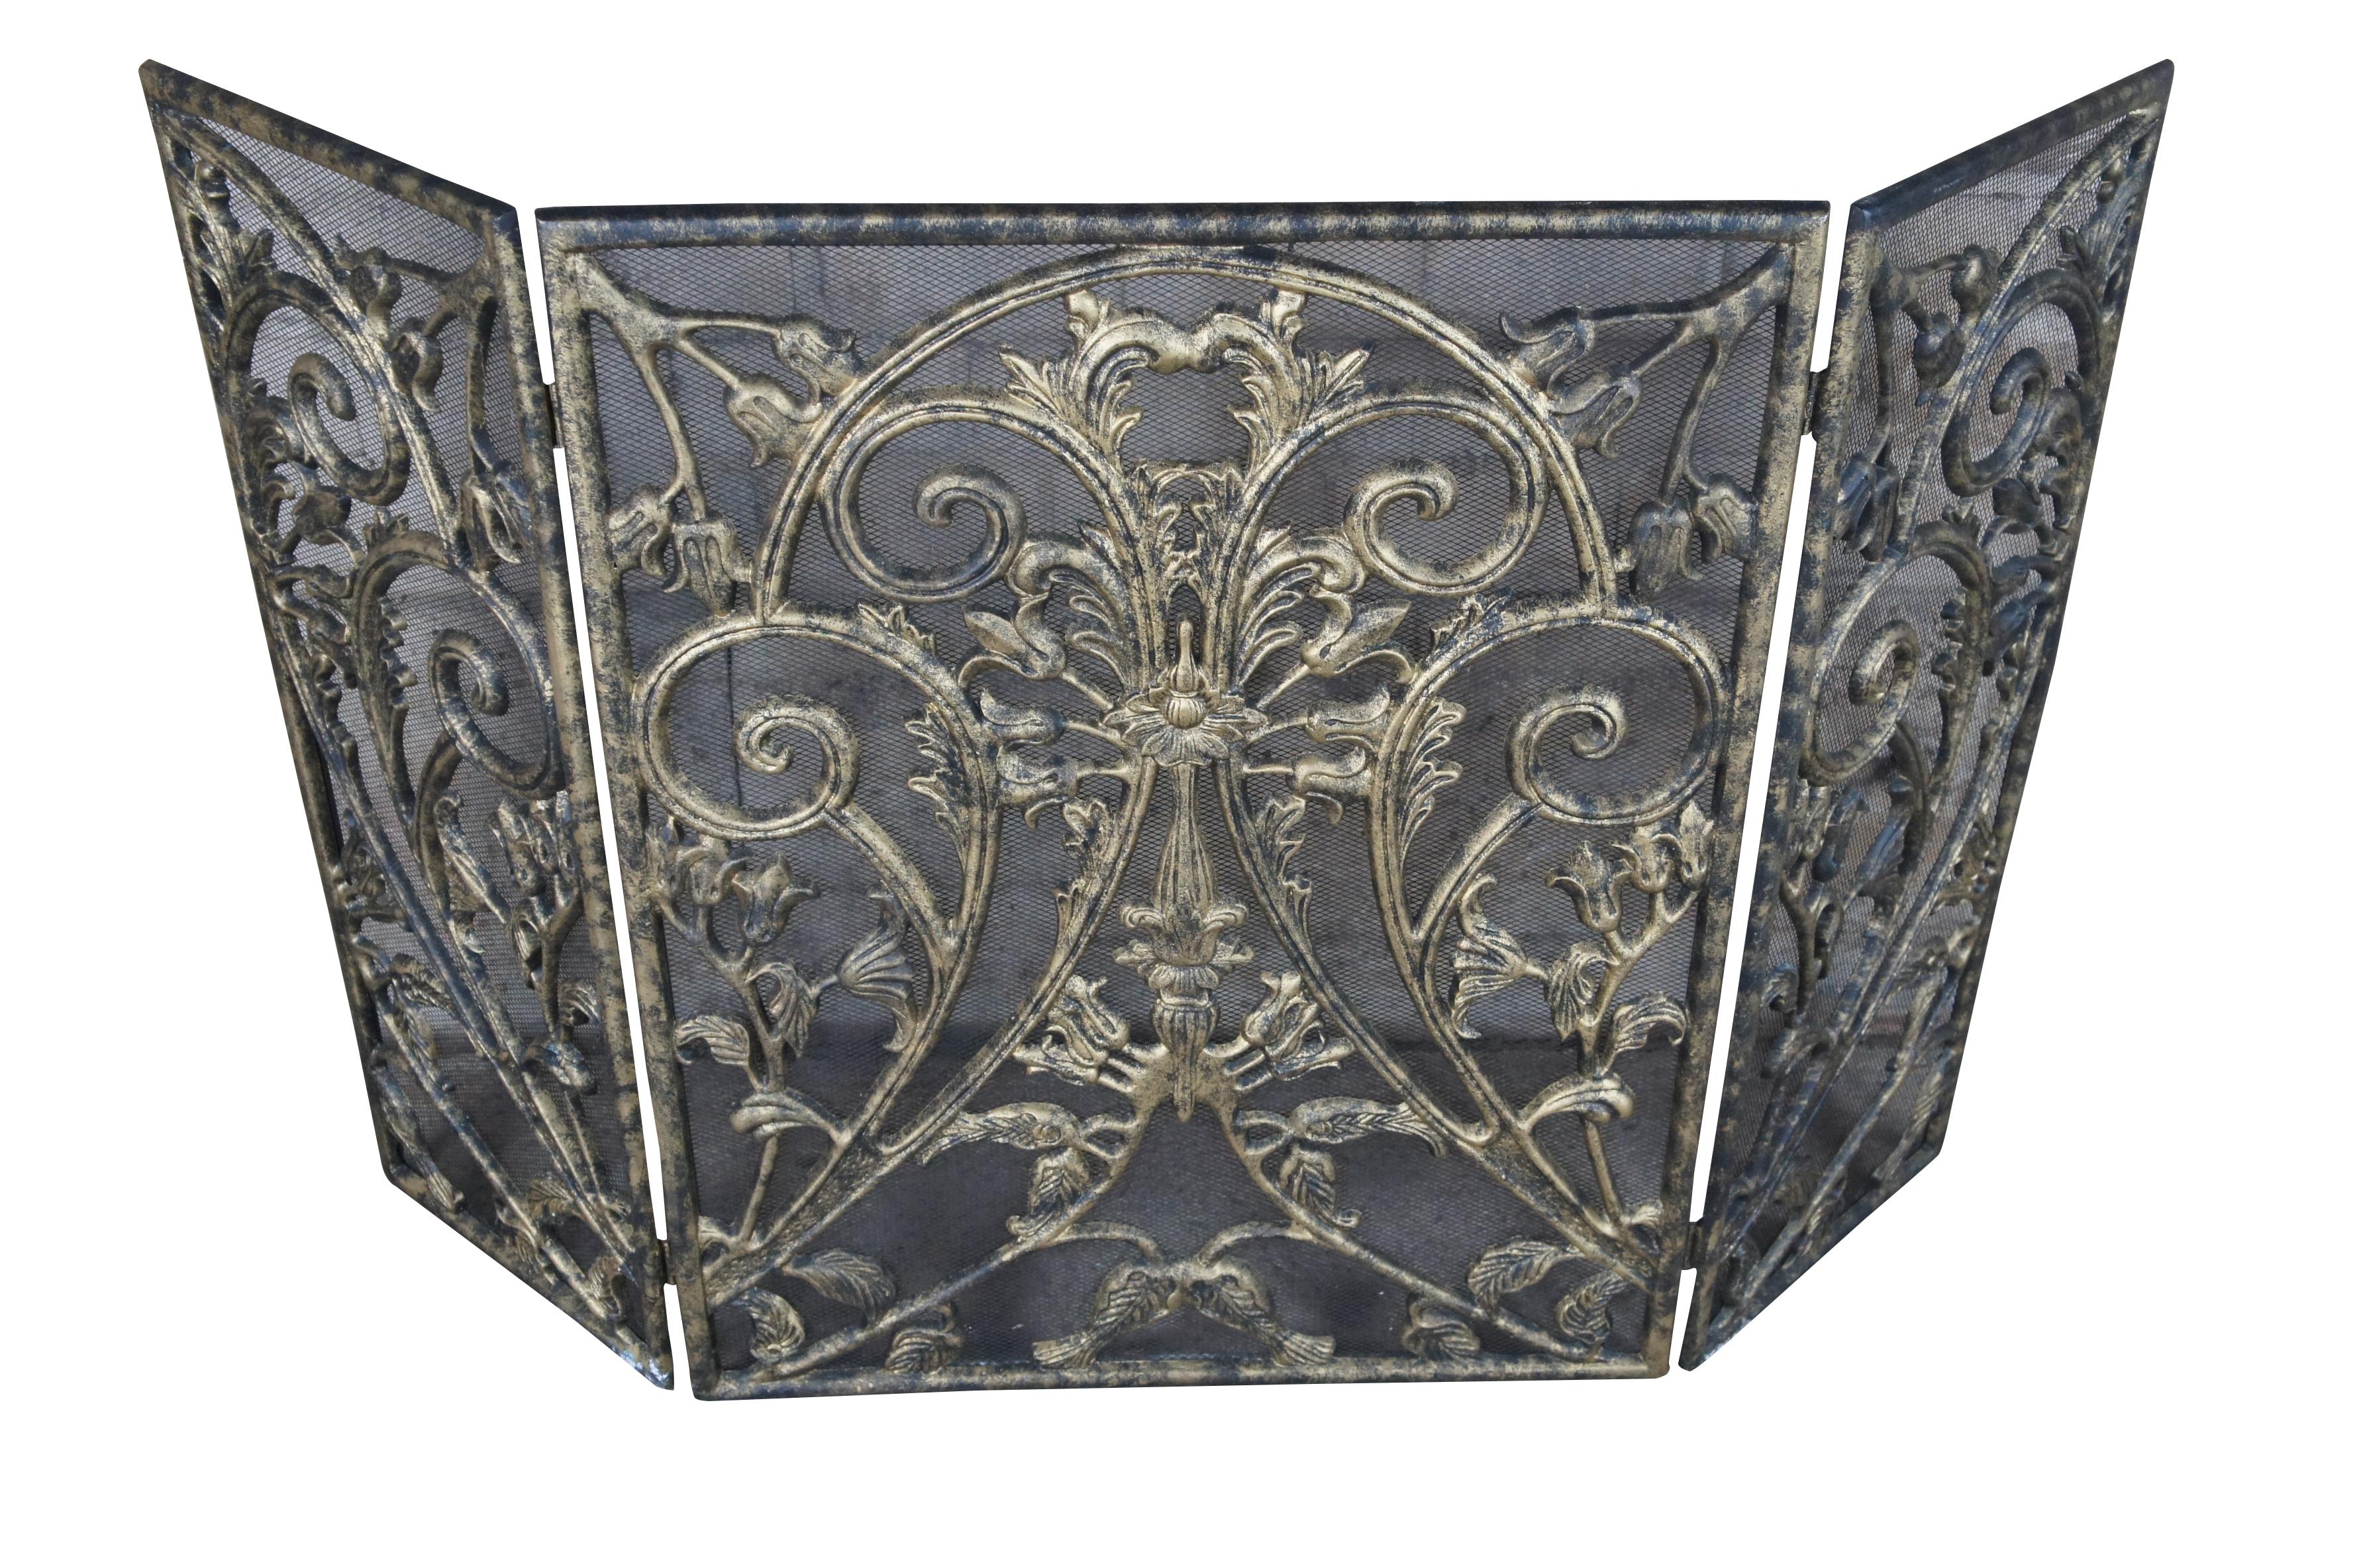 Vintage brass and mesh fireplace folding screen featuring a scrolled floral acanthus theme.

Dimensions:
27.5